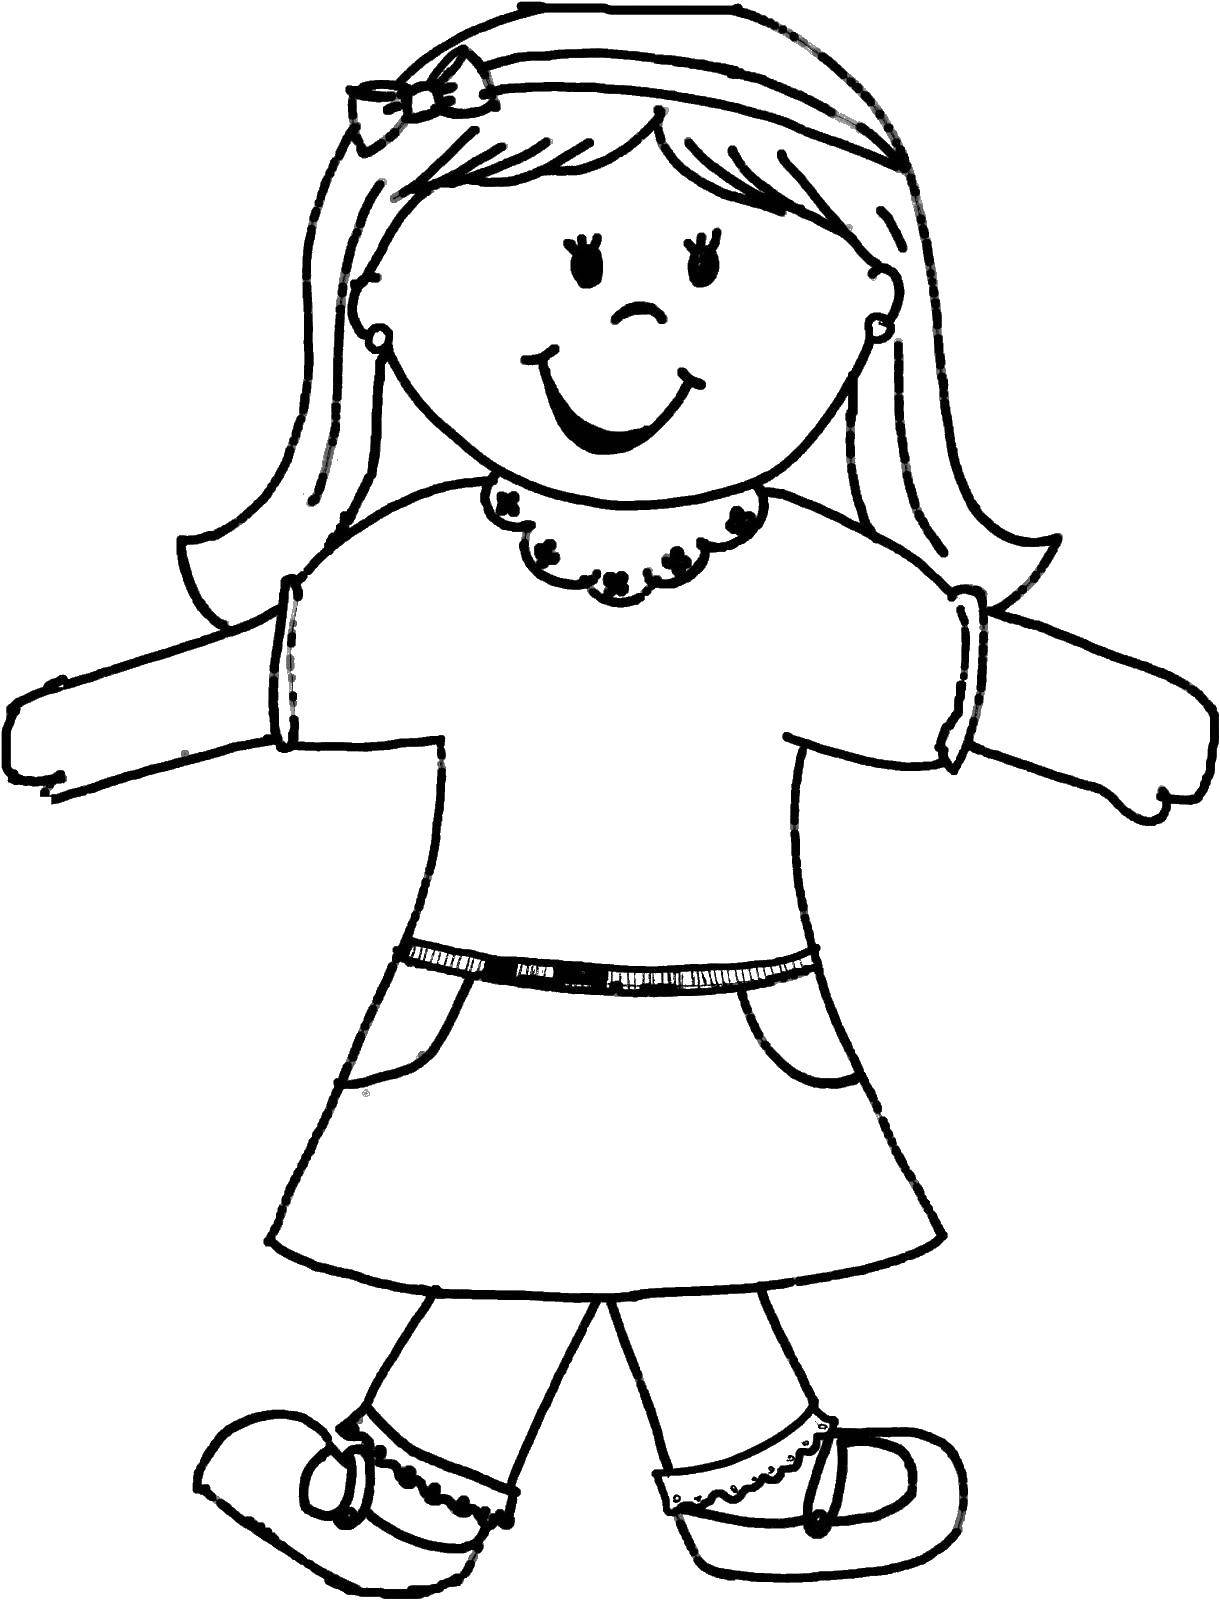 Coloring Girl doll. Category Dolls. Tags:  girls, dolls for girls, doll.